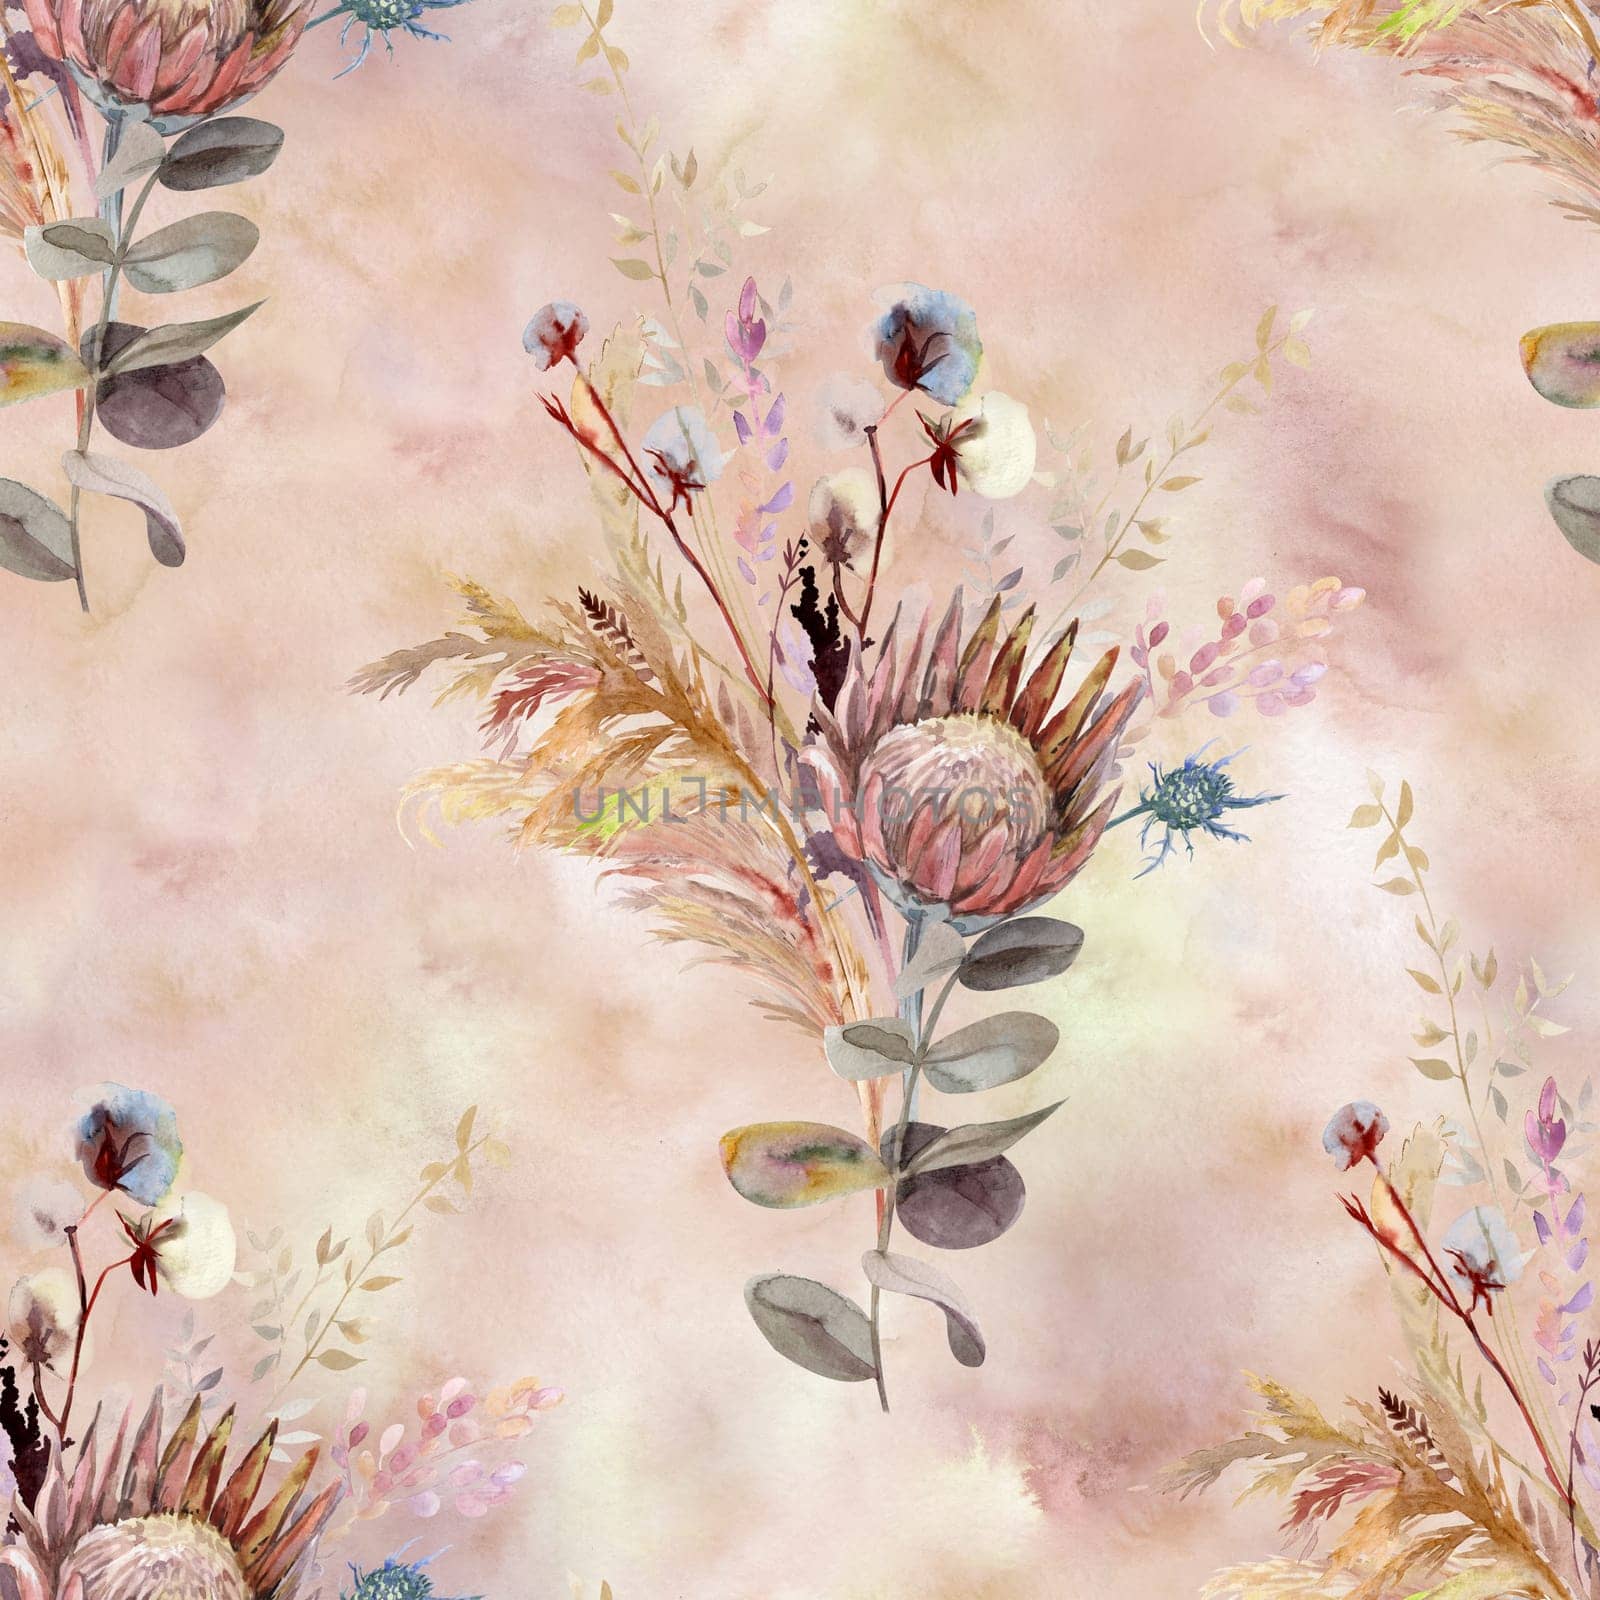 Botanical seamless pattern with bouquet of dried protea flowers and tropical dried flowers on beige backgroun for summer textile and surface design